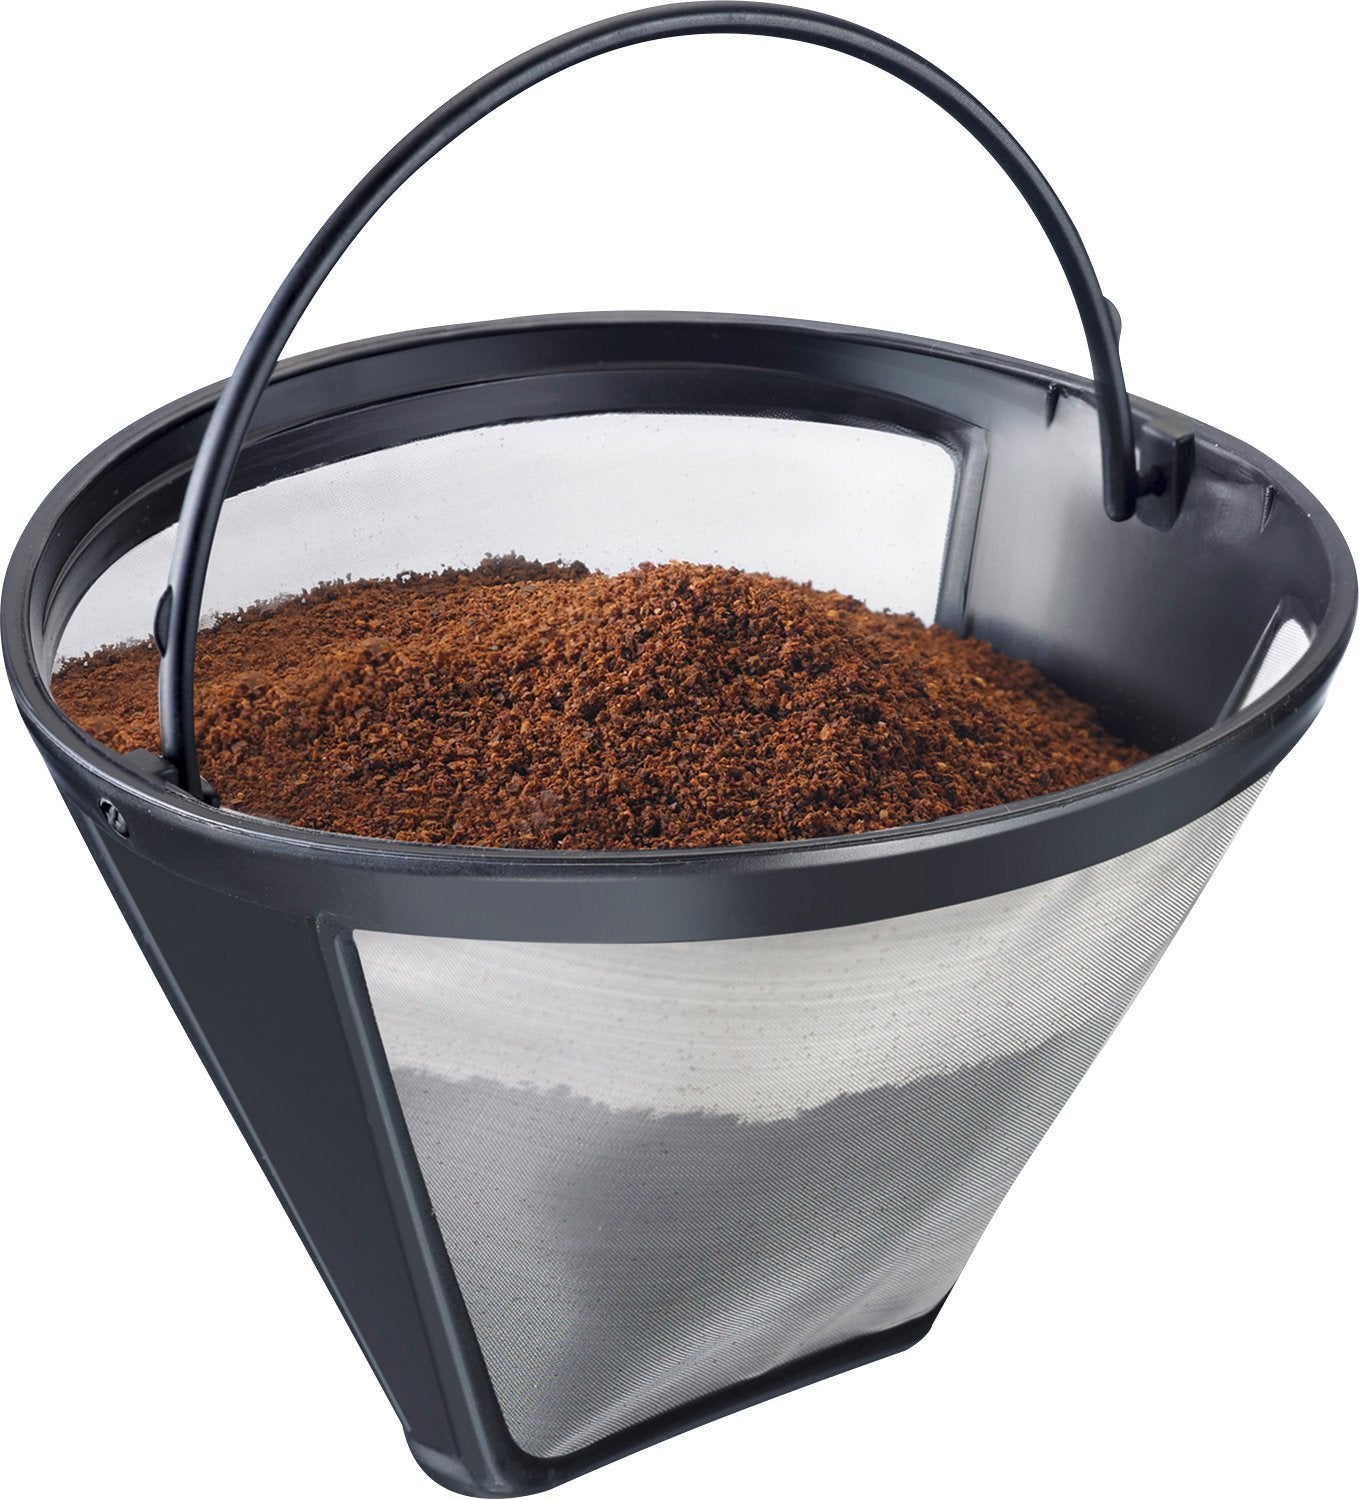 Permanent coffee filter